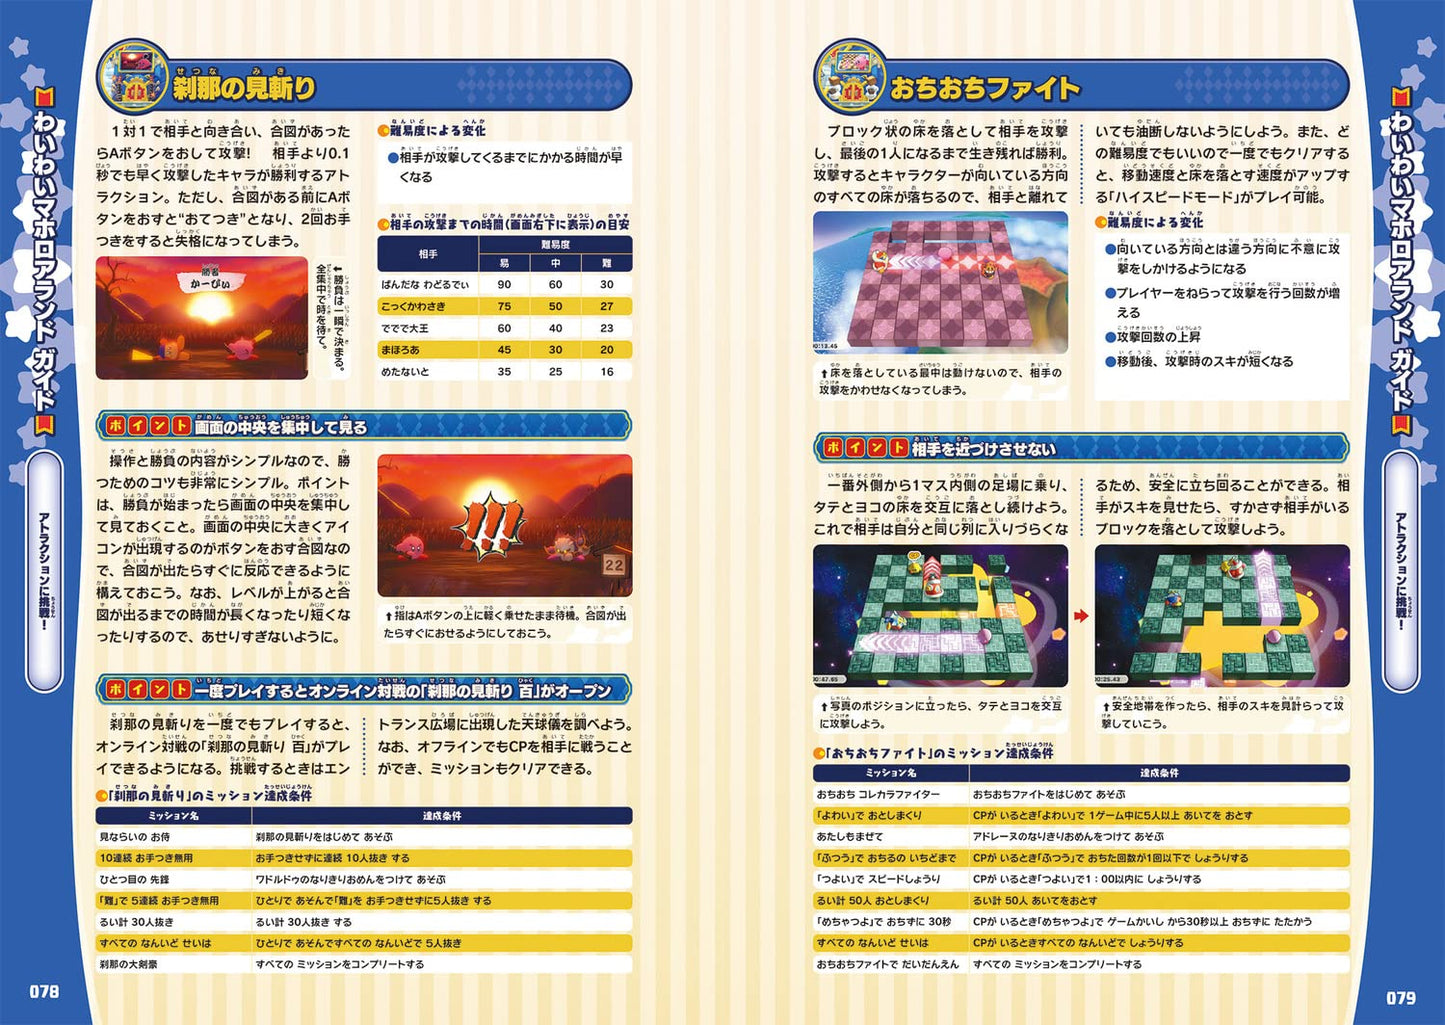 Kirby’s Return to Dream Land Deluxe Official Guide Book